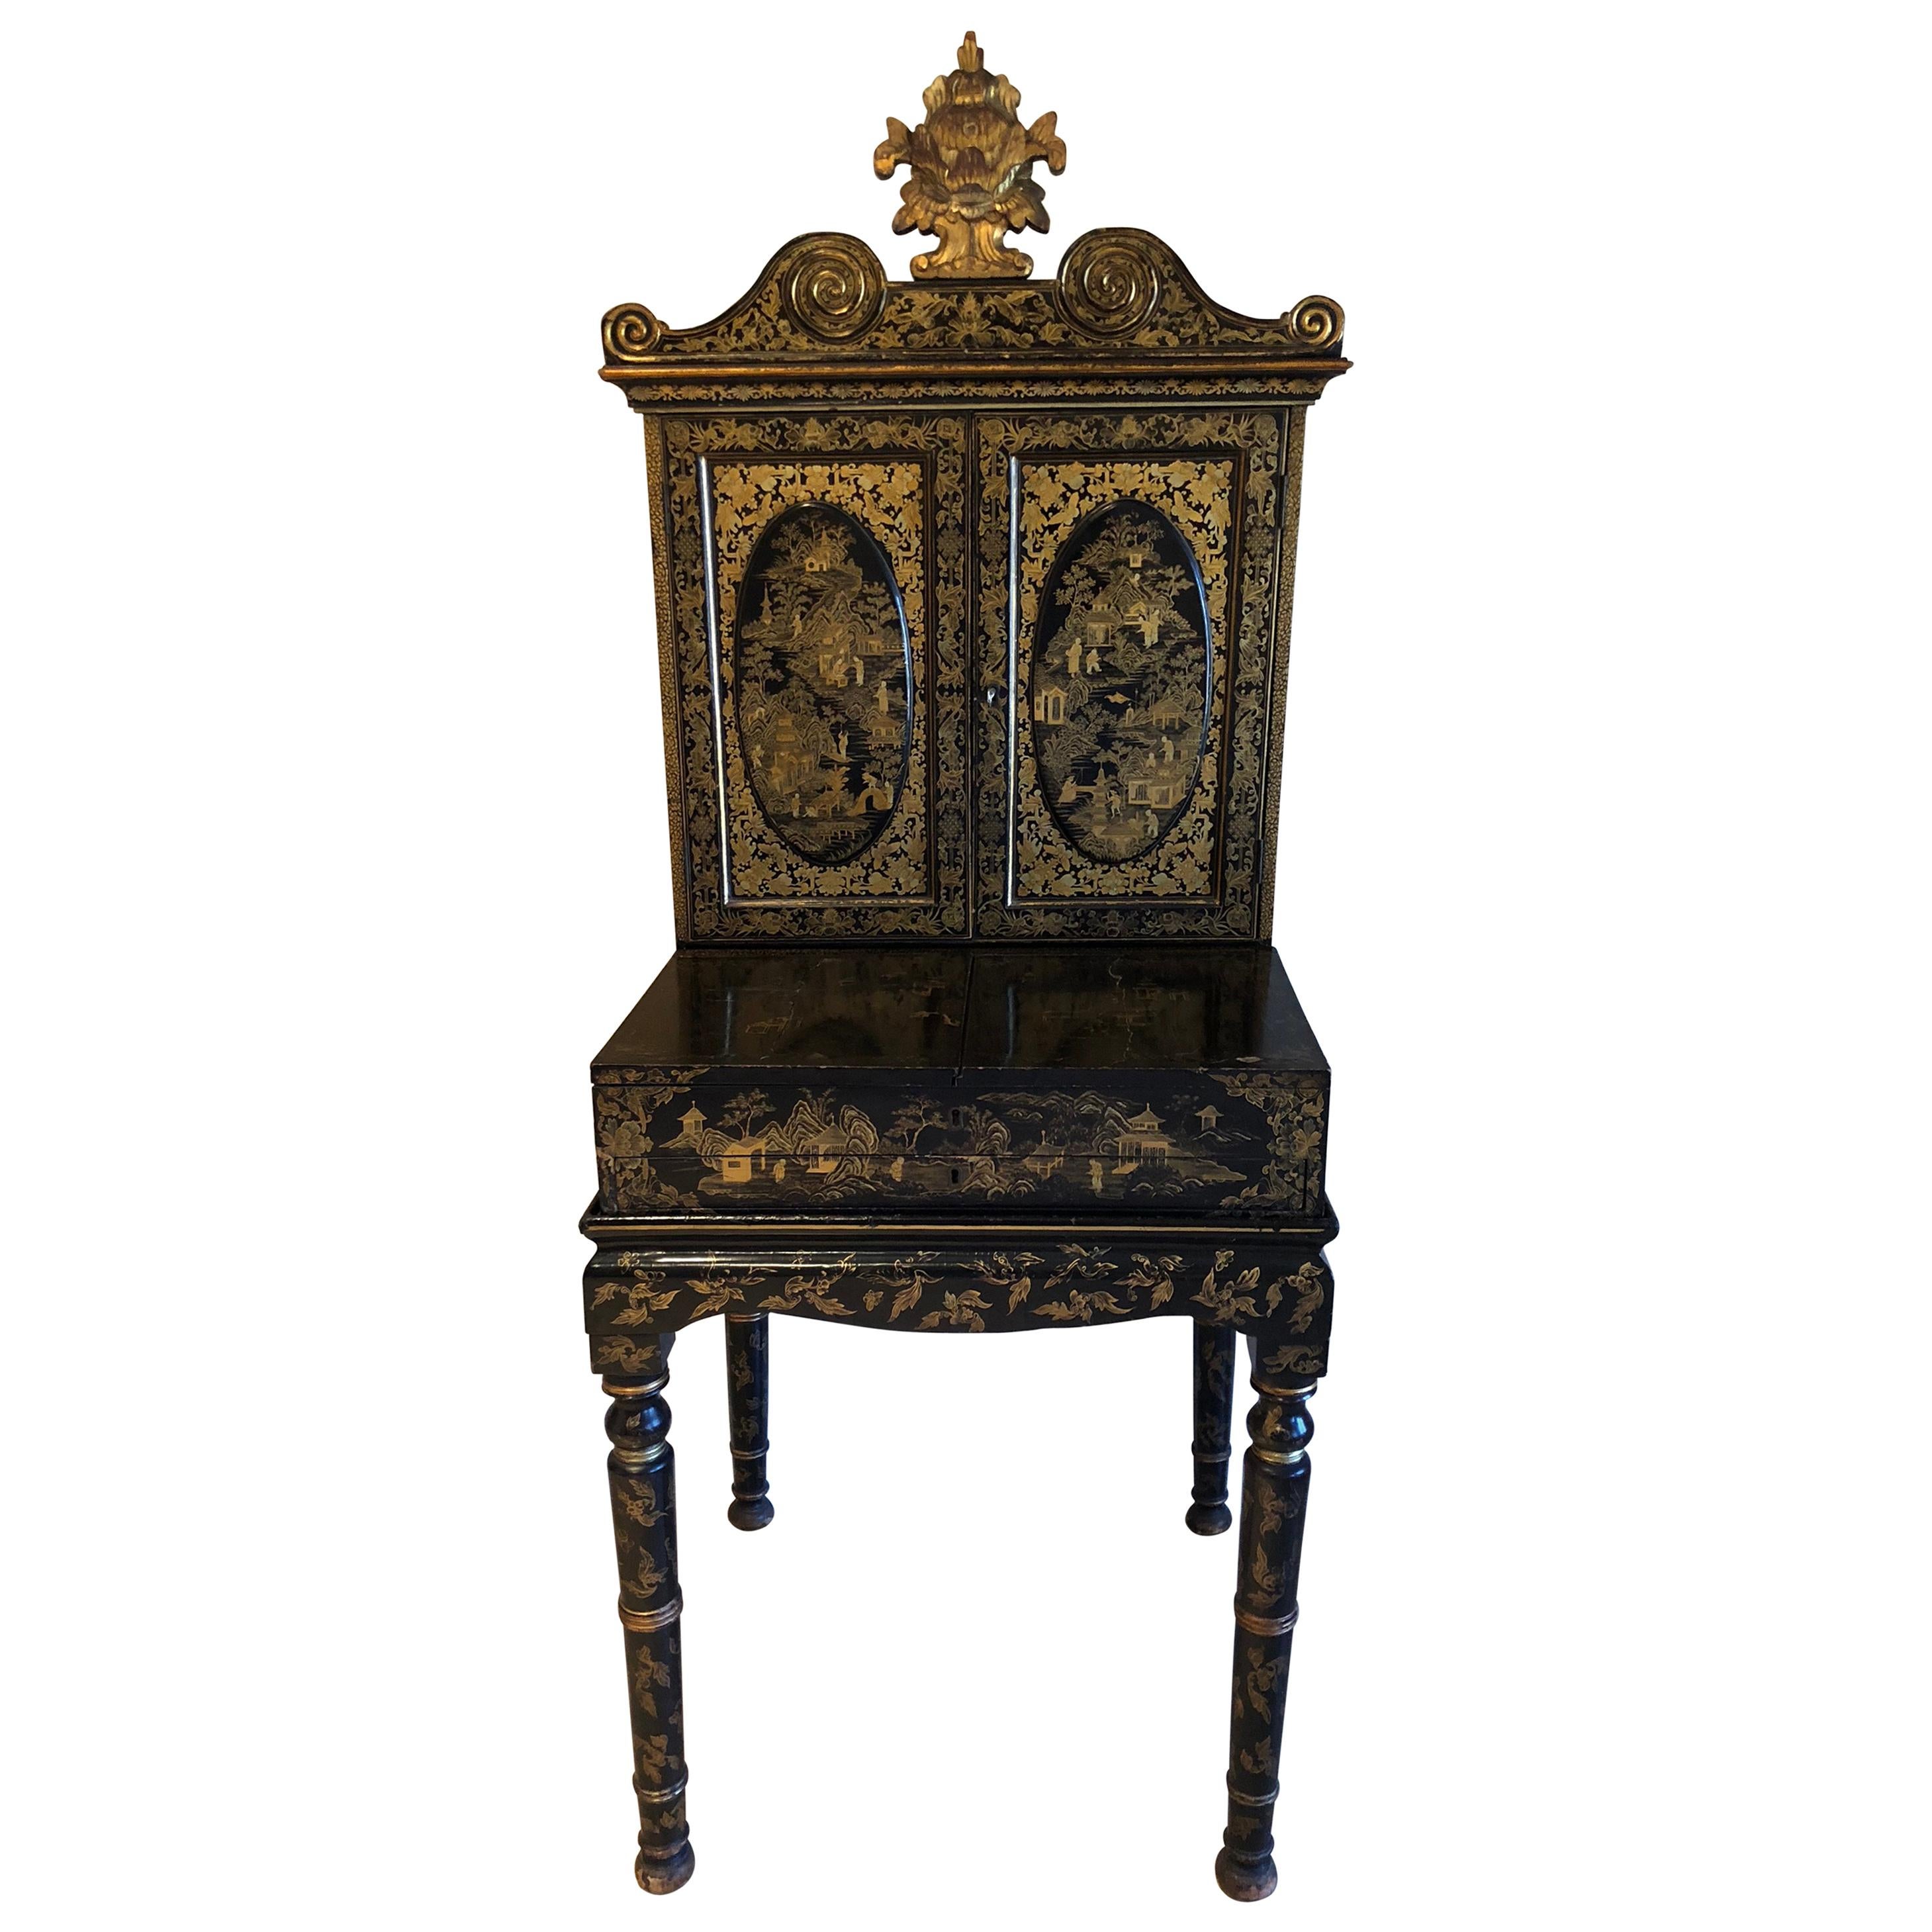 Exquisite Antique Chinese Export Gilt Decorated Black Lacquer Cabinet on Stand